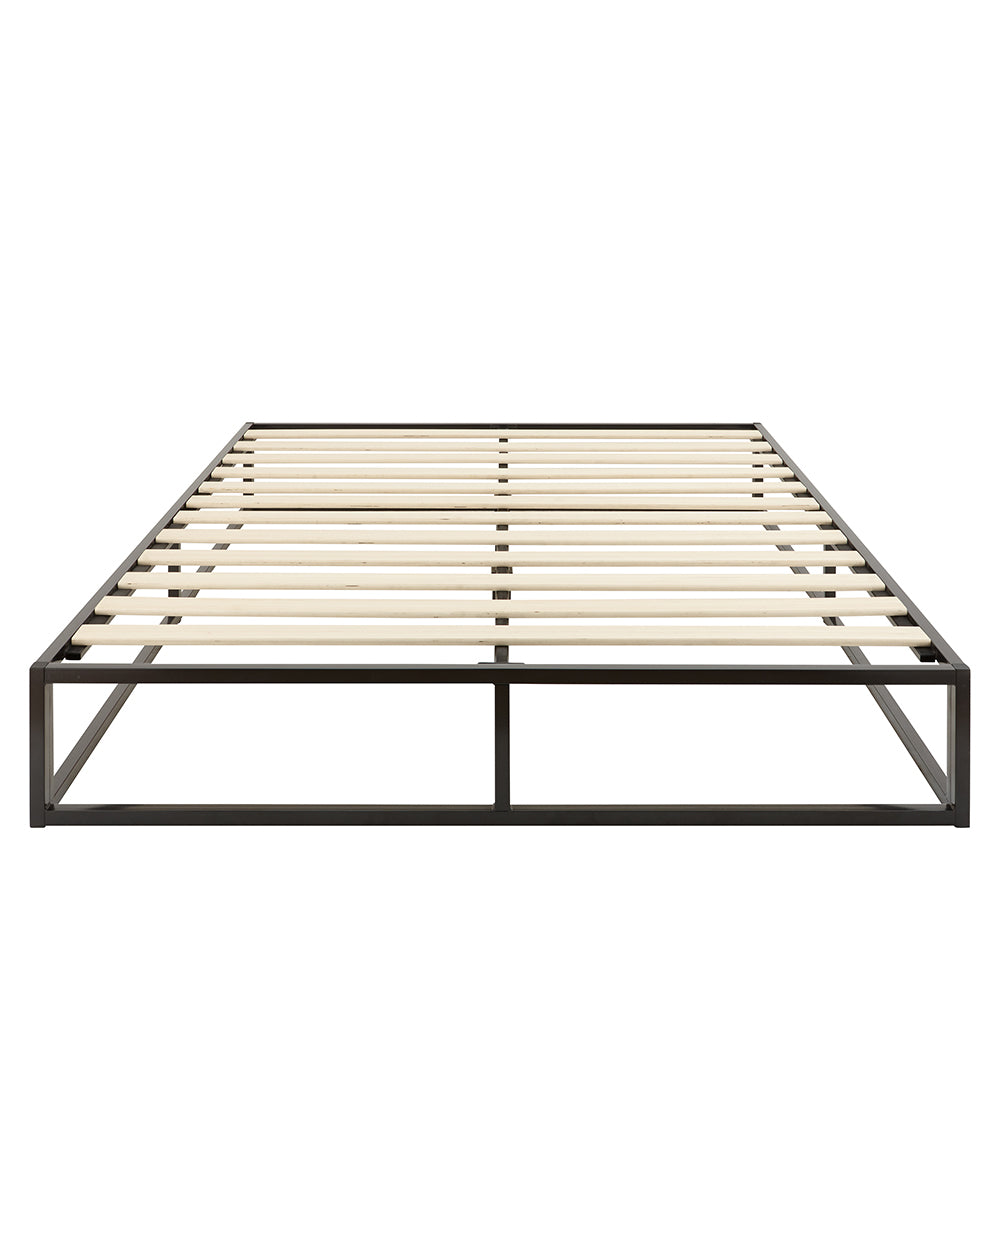 small double bed frame black industrial platform bed white cut out image close up of the black frame